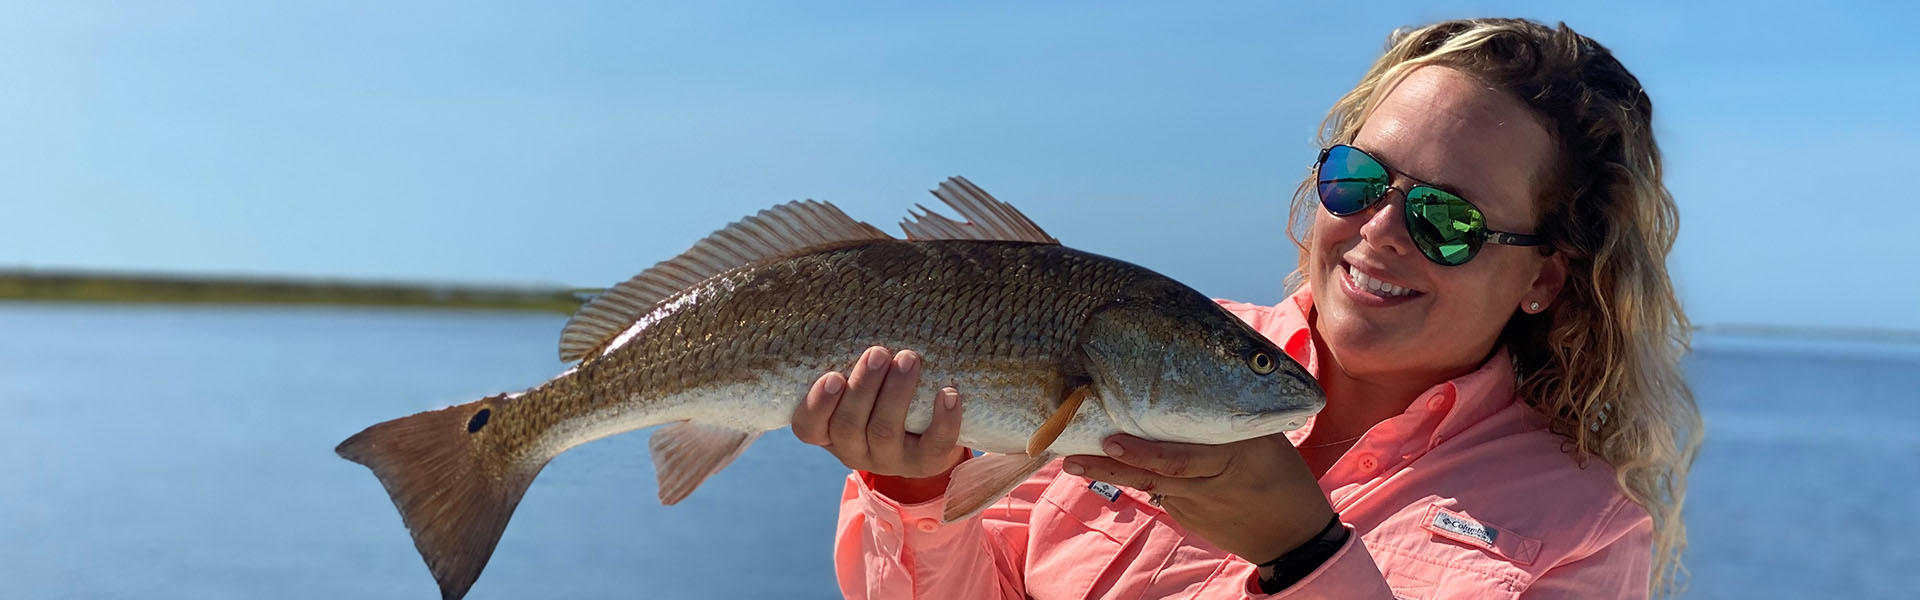 Florida Fishing - #1 Best Guide To Fishing In Florida